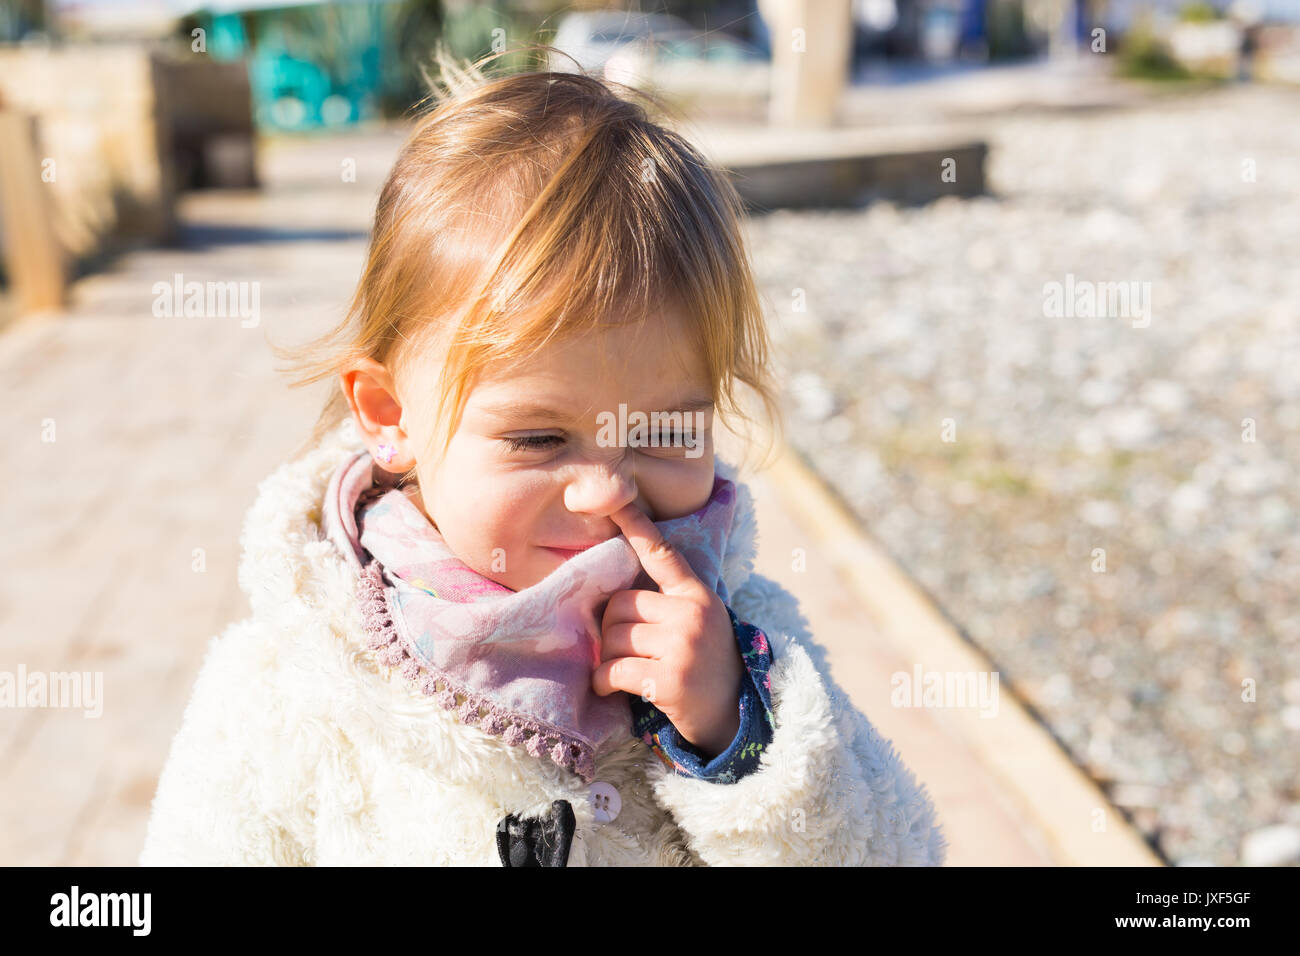 Cute little toddler baby girl picking her nose. Stock Photo